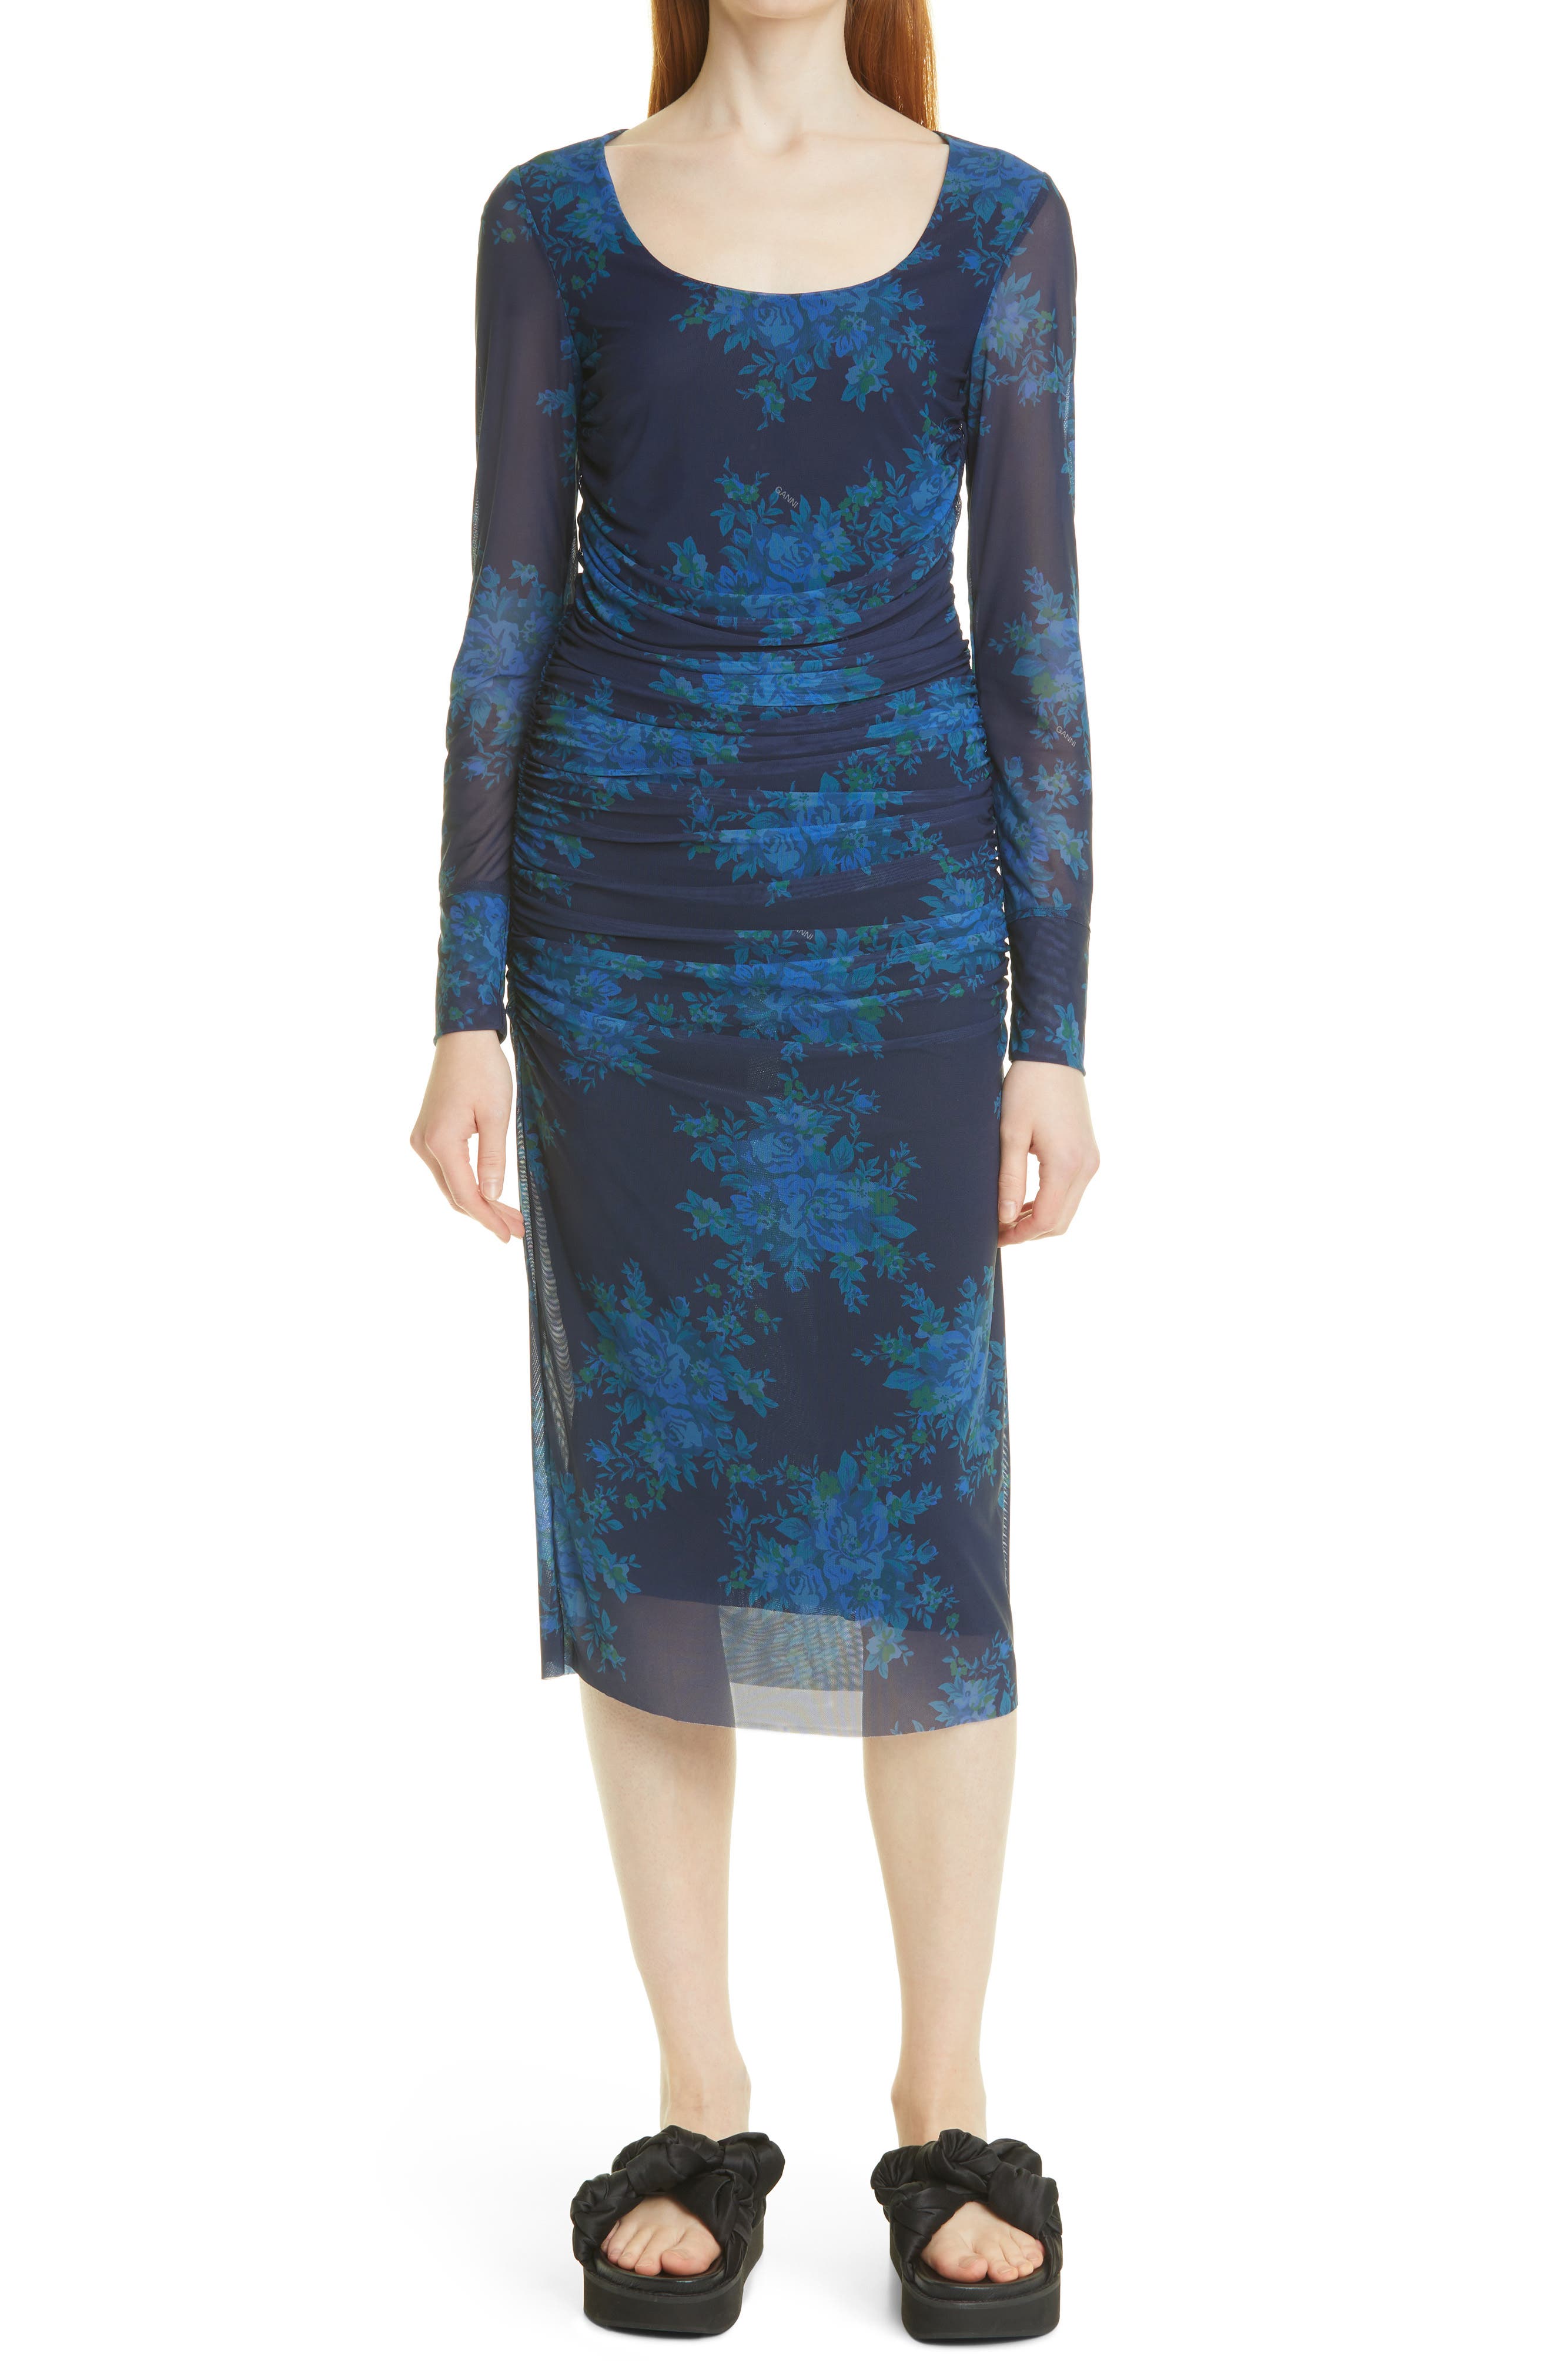 Ganni Floral Ruched Long Sleeve Dress in Sky Captain at Nordstrom, Size 2 Us